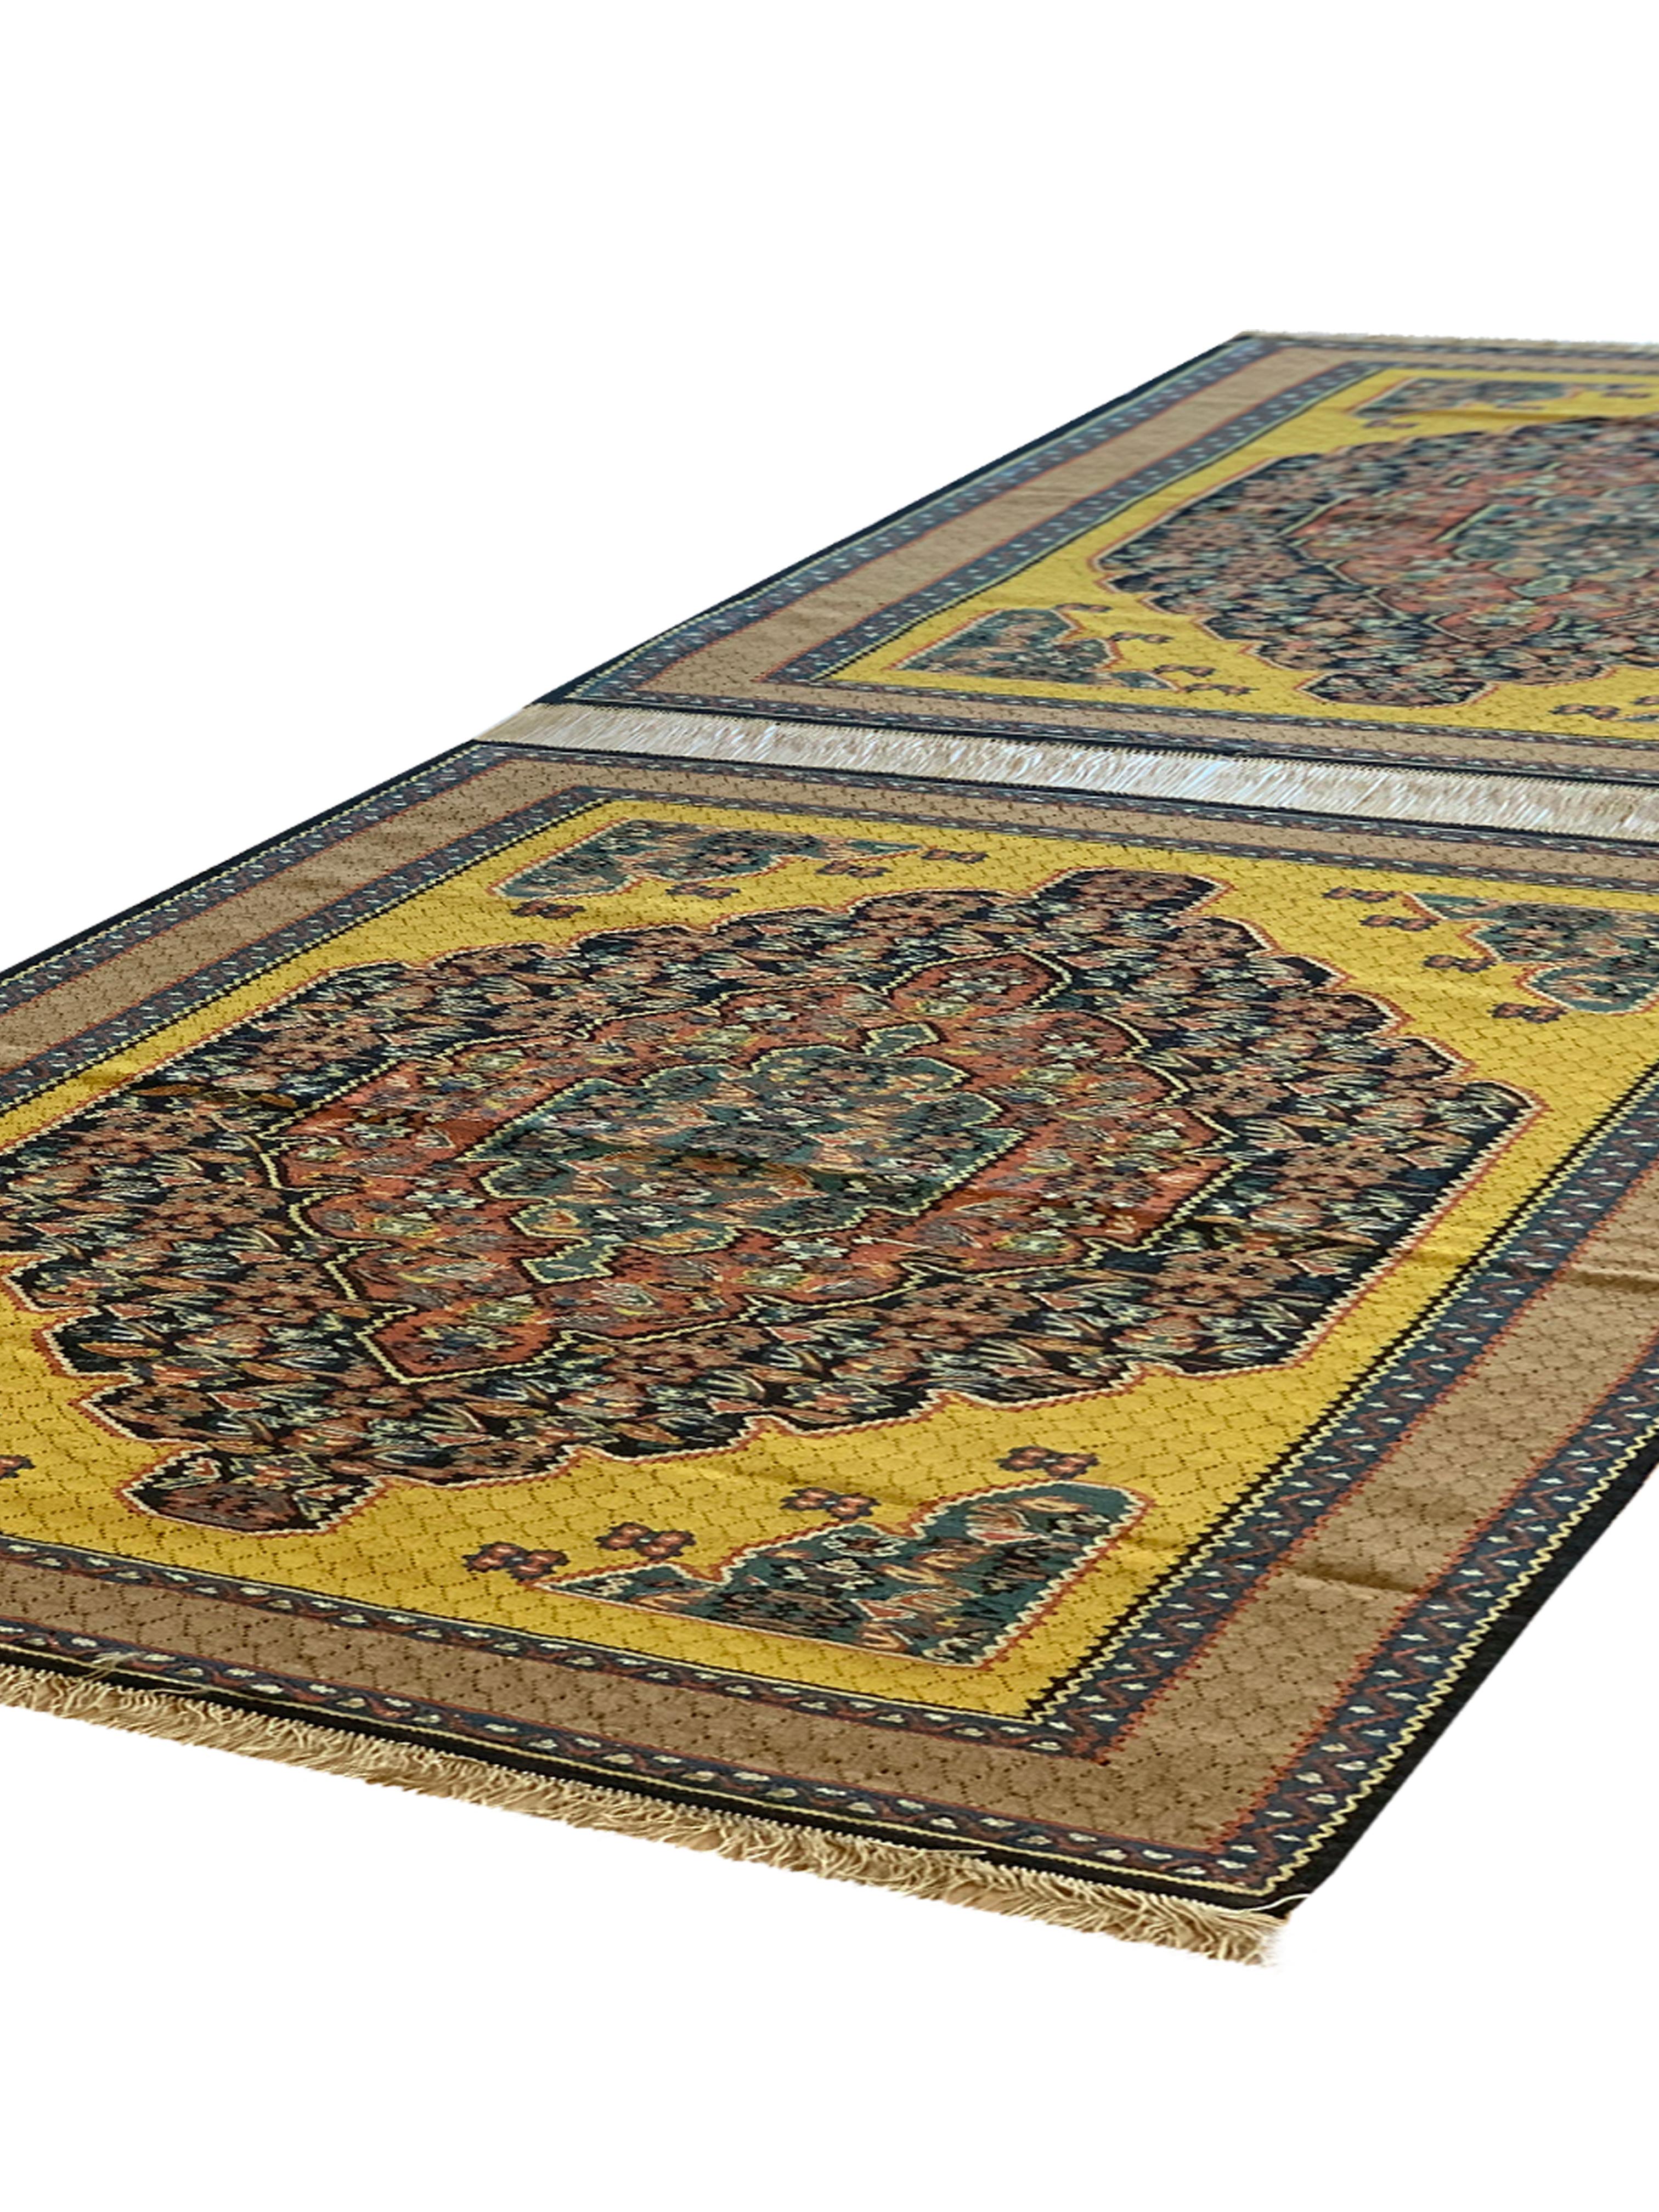 Pair of Handmade Kilim Rugs Two Traditional Yellow Wool & Silk Rugs For Sale 5